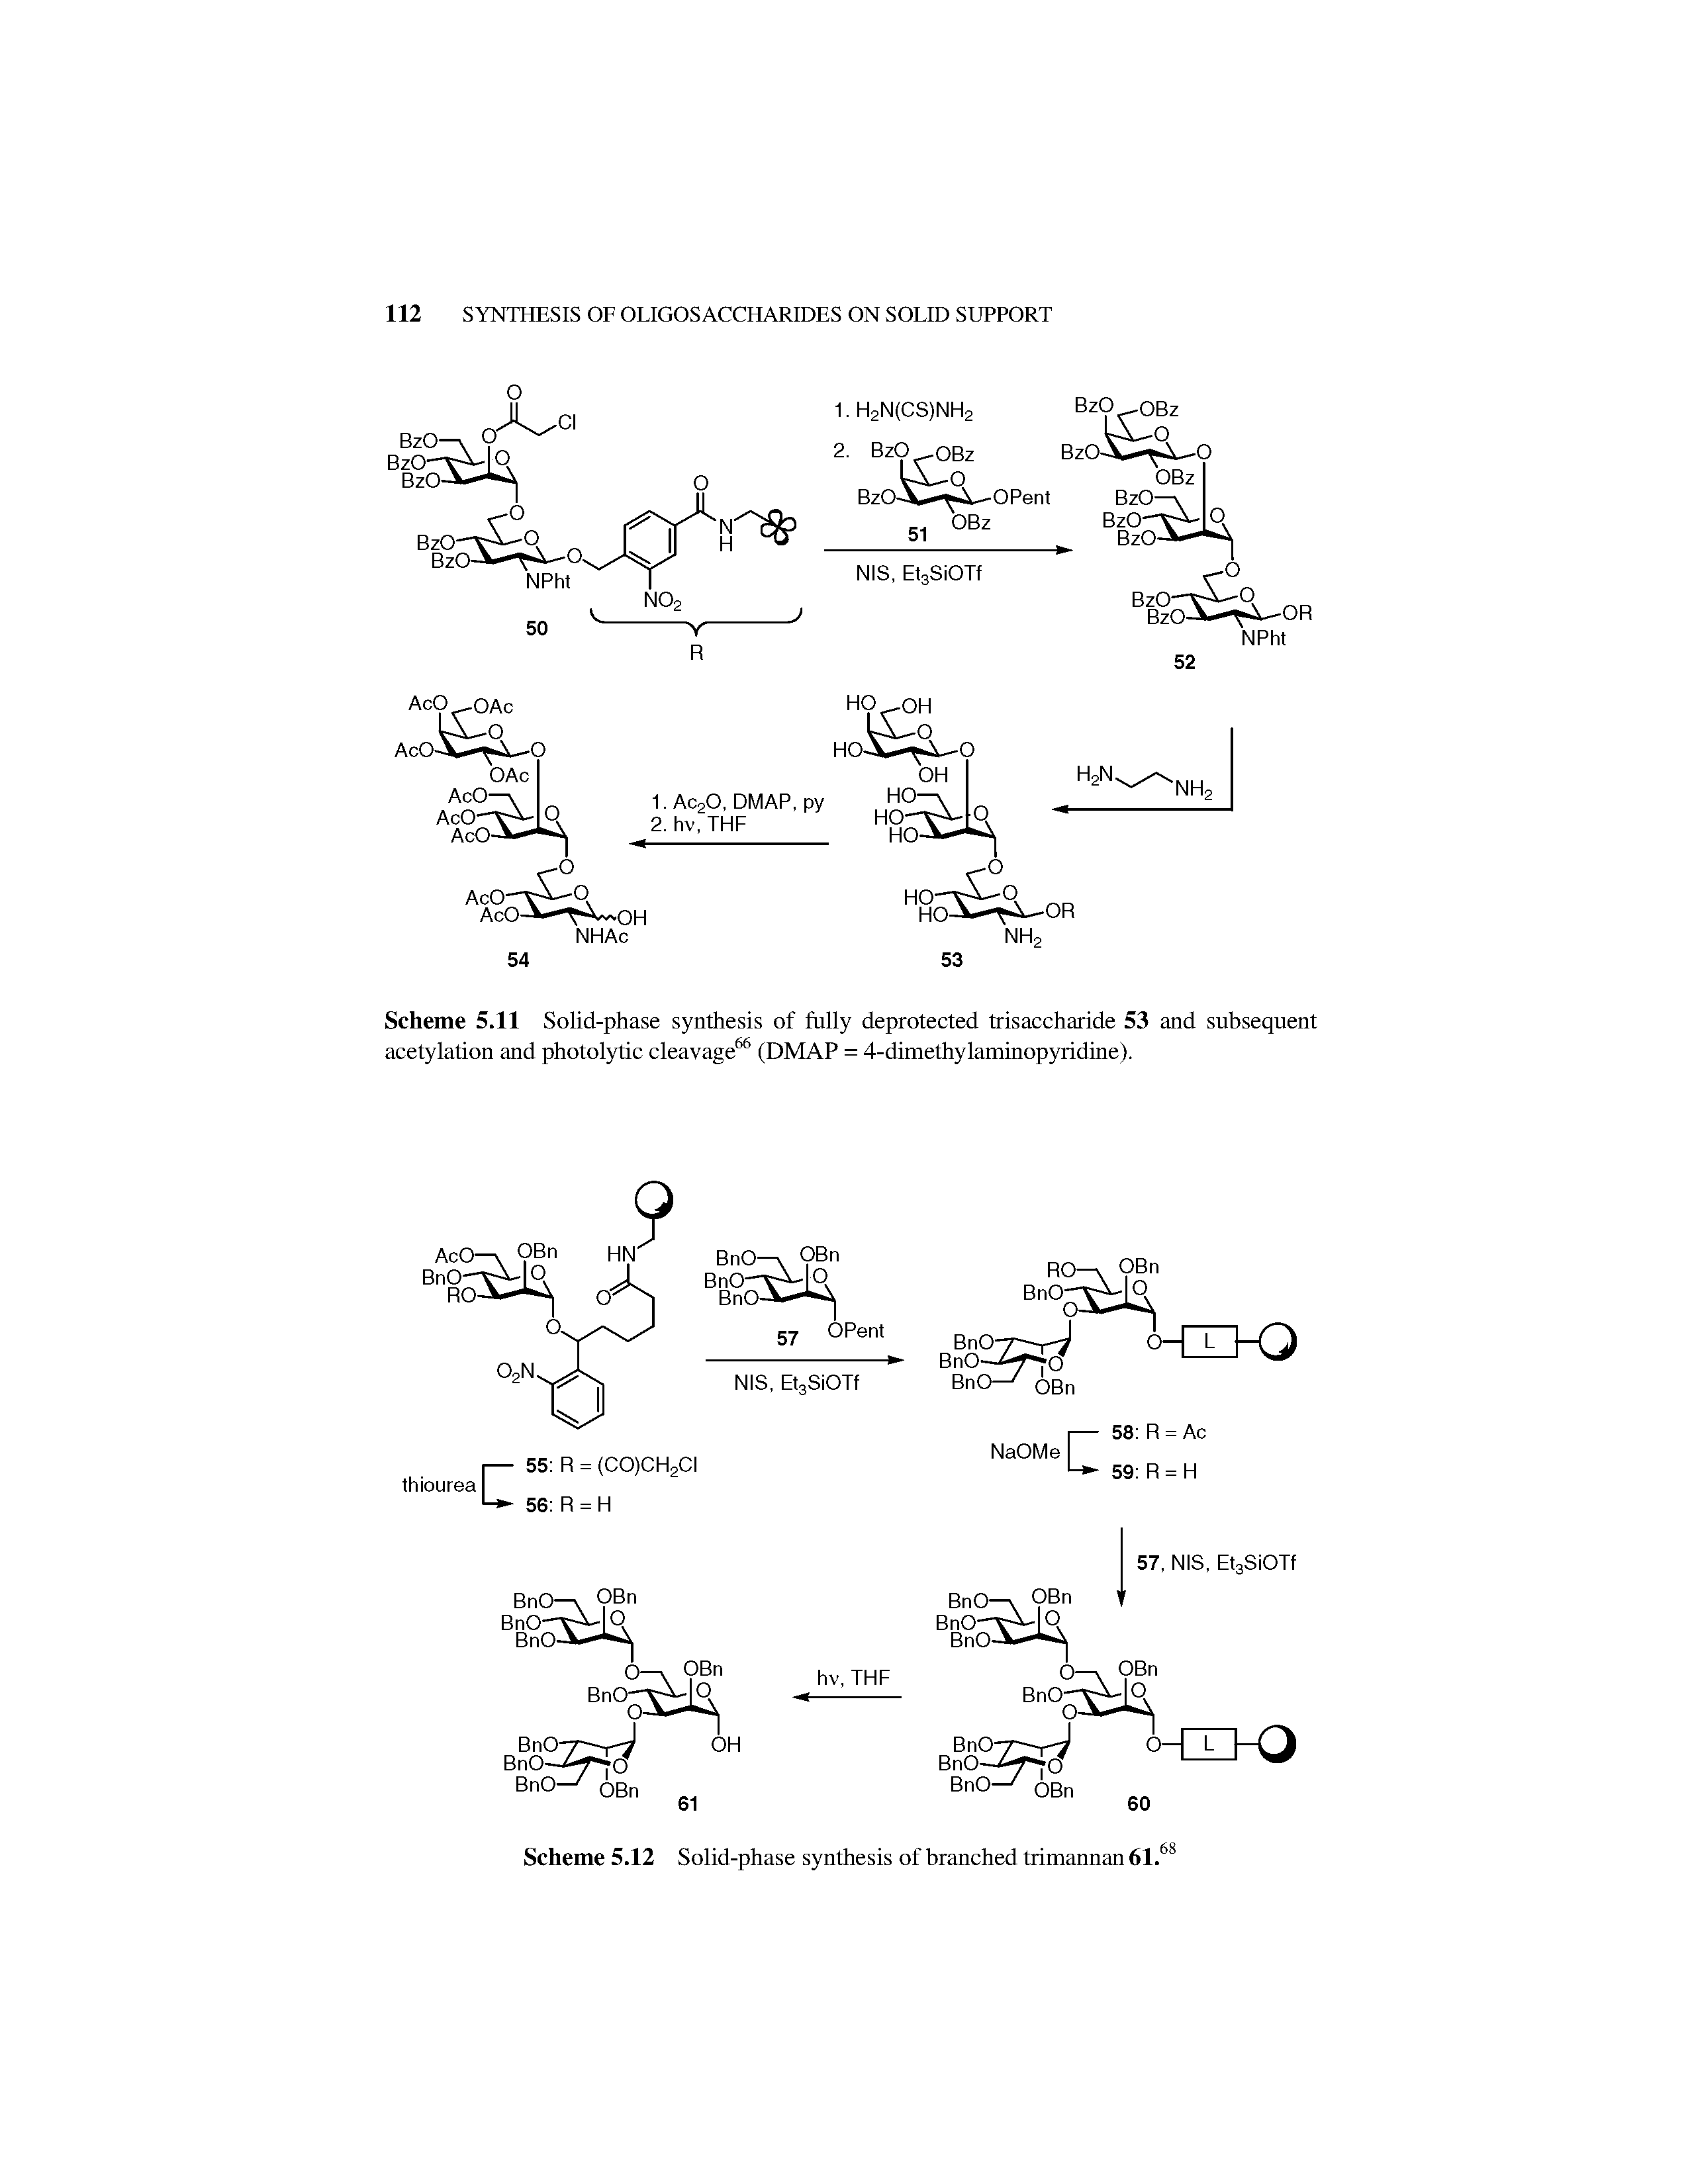 Scheme 5.11 Solid-phase synthesis of fully deprotected trisaccharide 53 and subsequent acetylation and photolytic cleavage66 (DMAP = 4-dimethylaminopyridine).